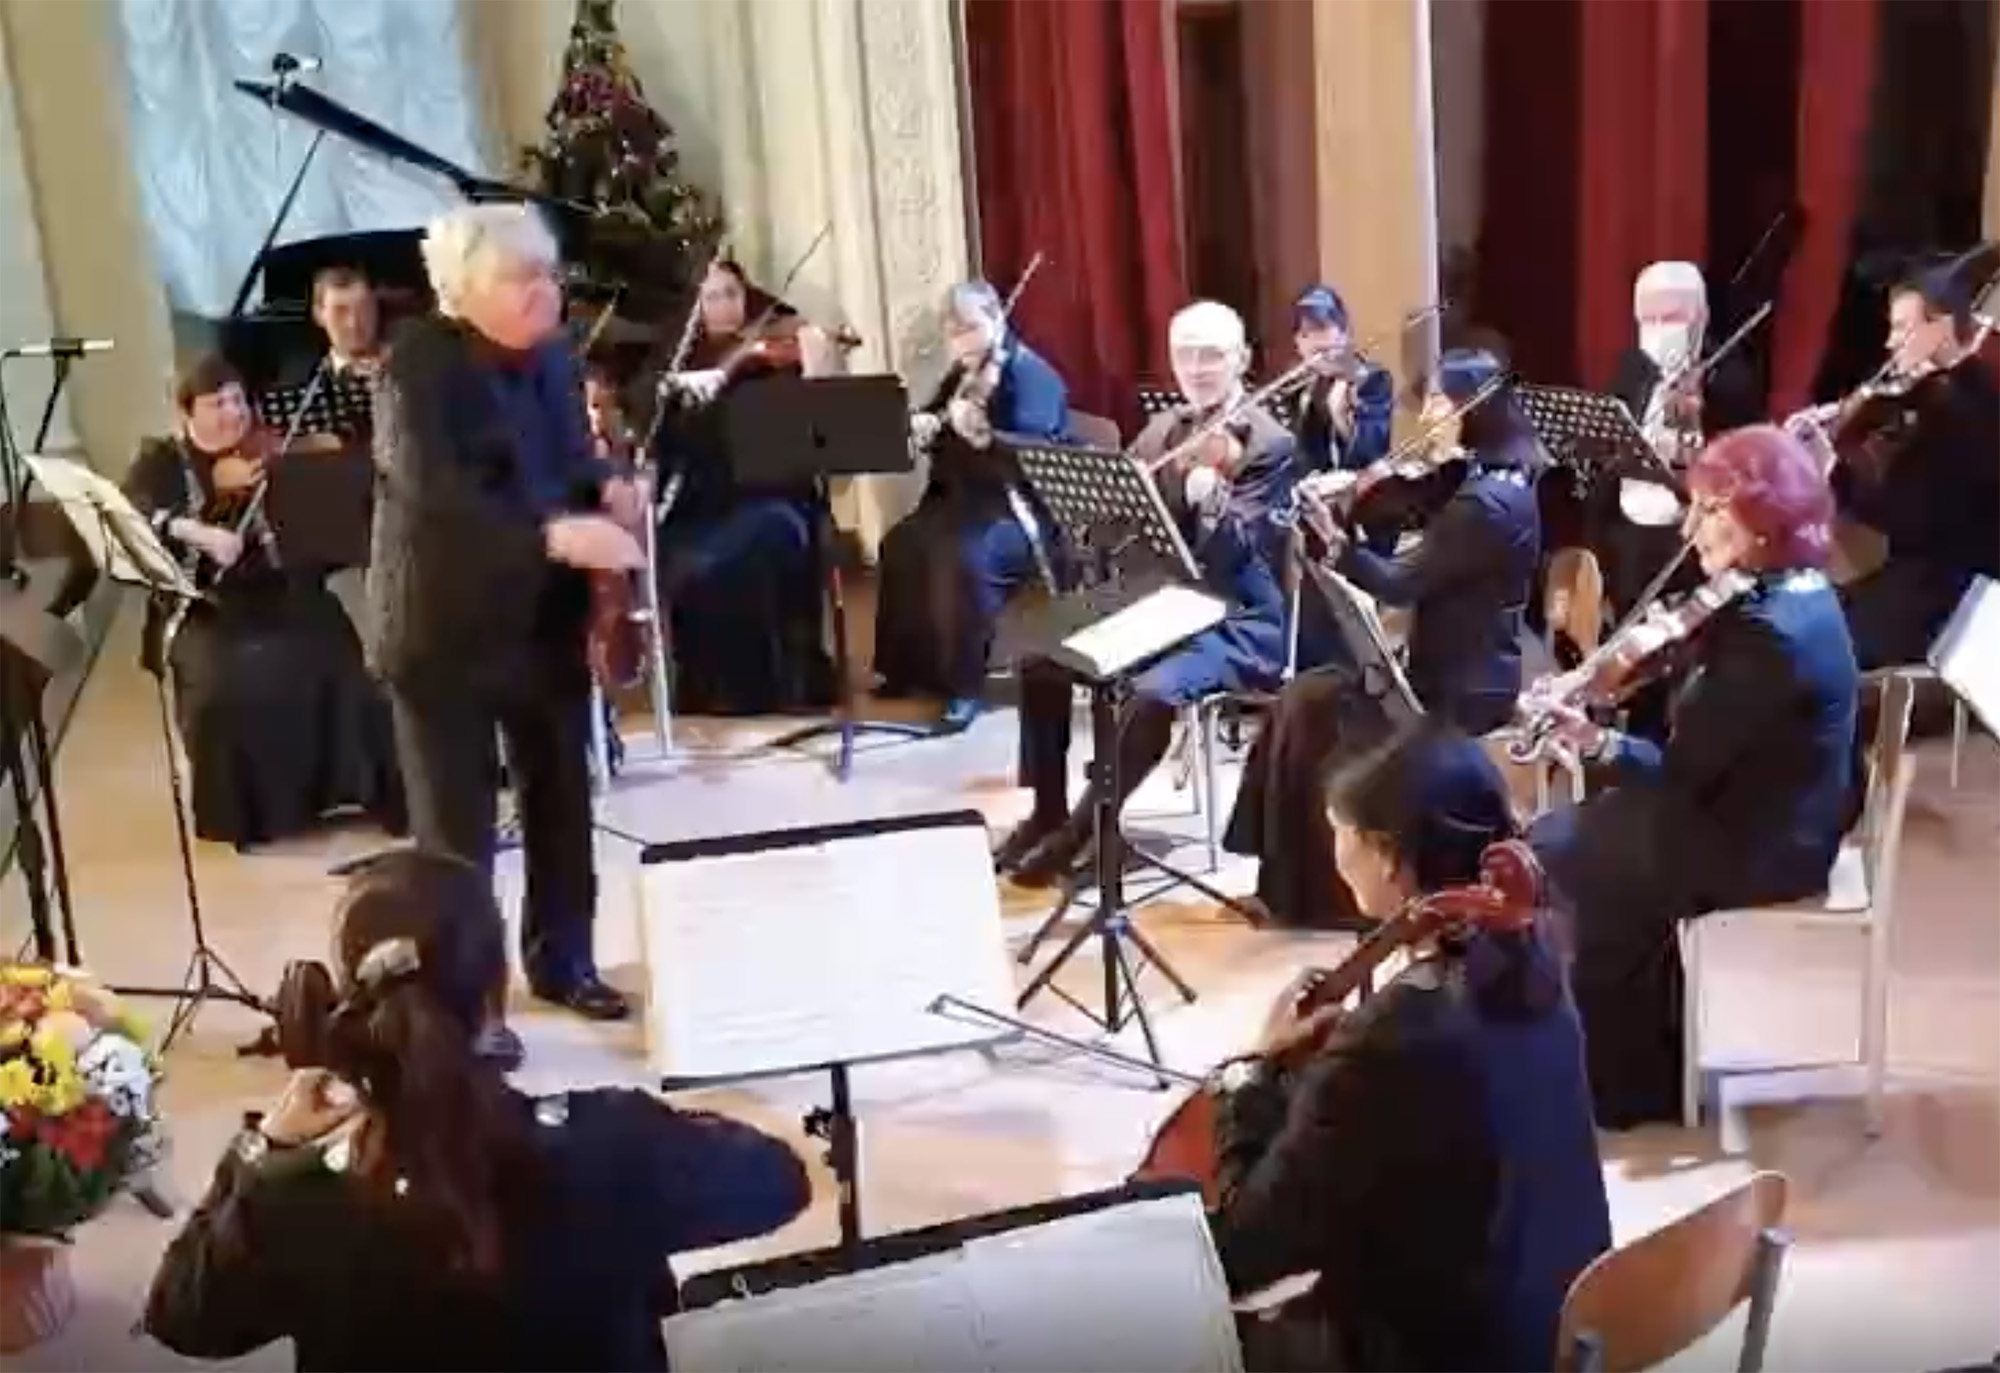 A screen grab from a video shows conductor Yuriy Kerpatenko conducting an orchestra.